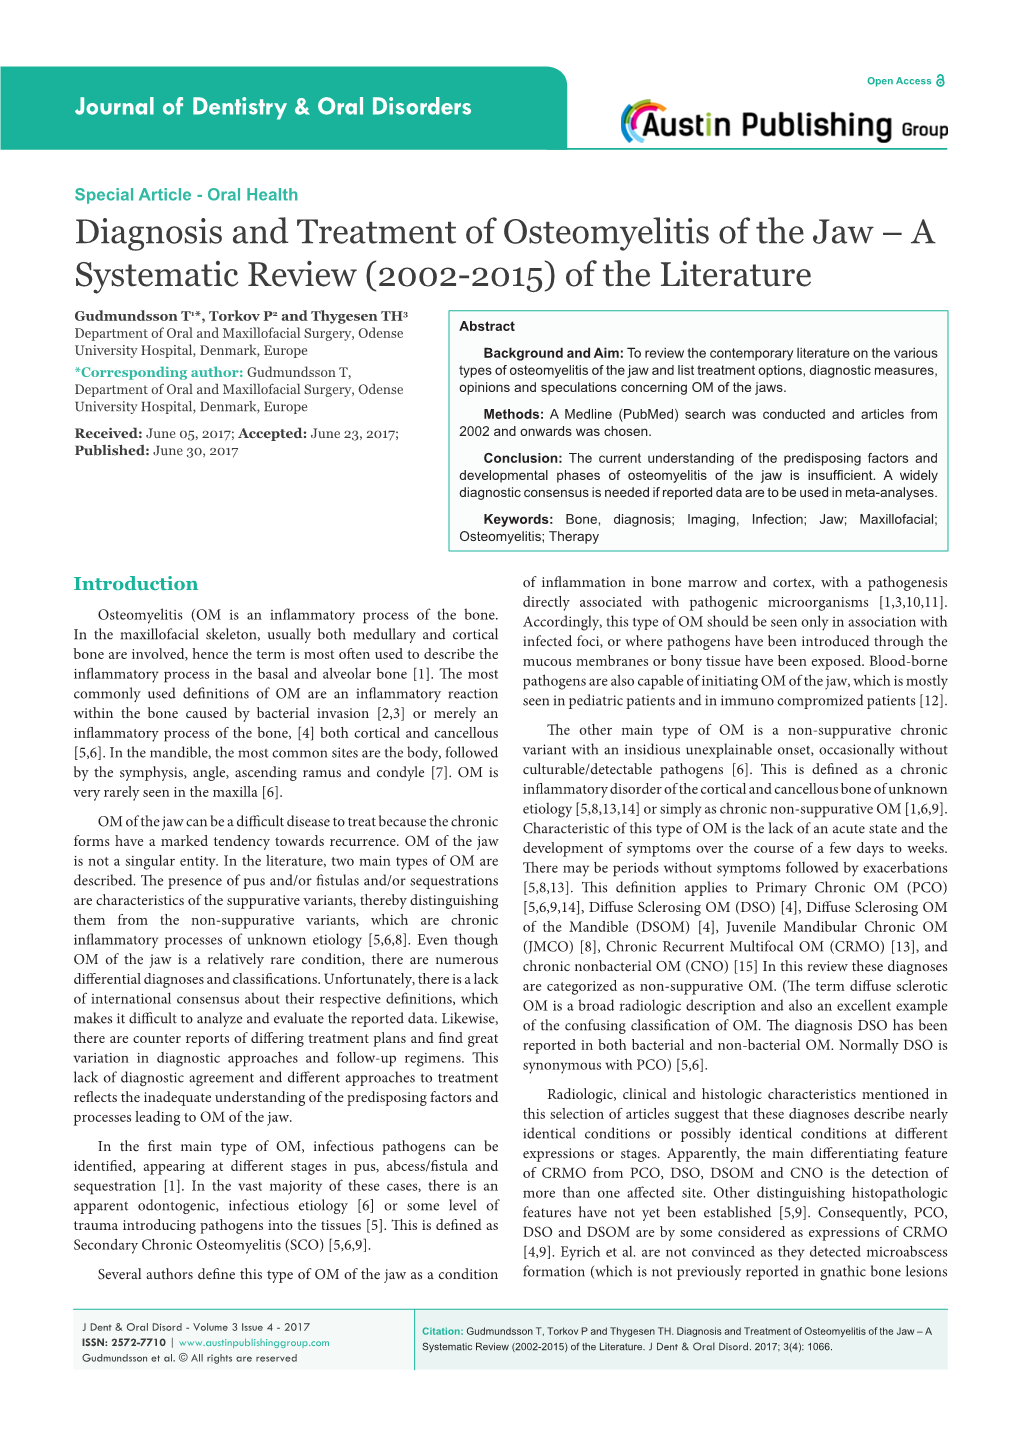 Diagnosis and Treatment of Osteomyelitis of the Jaw – a Systematic Review (2002-2015) of the Literature